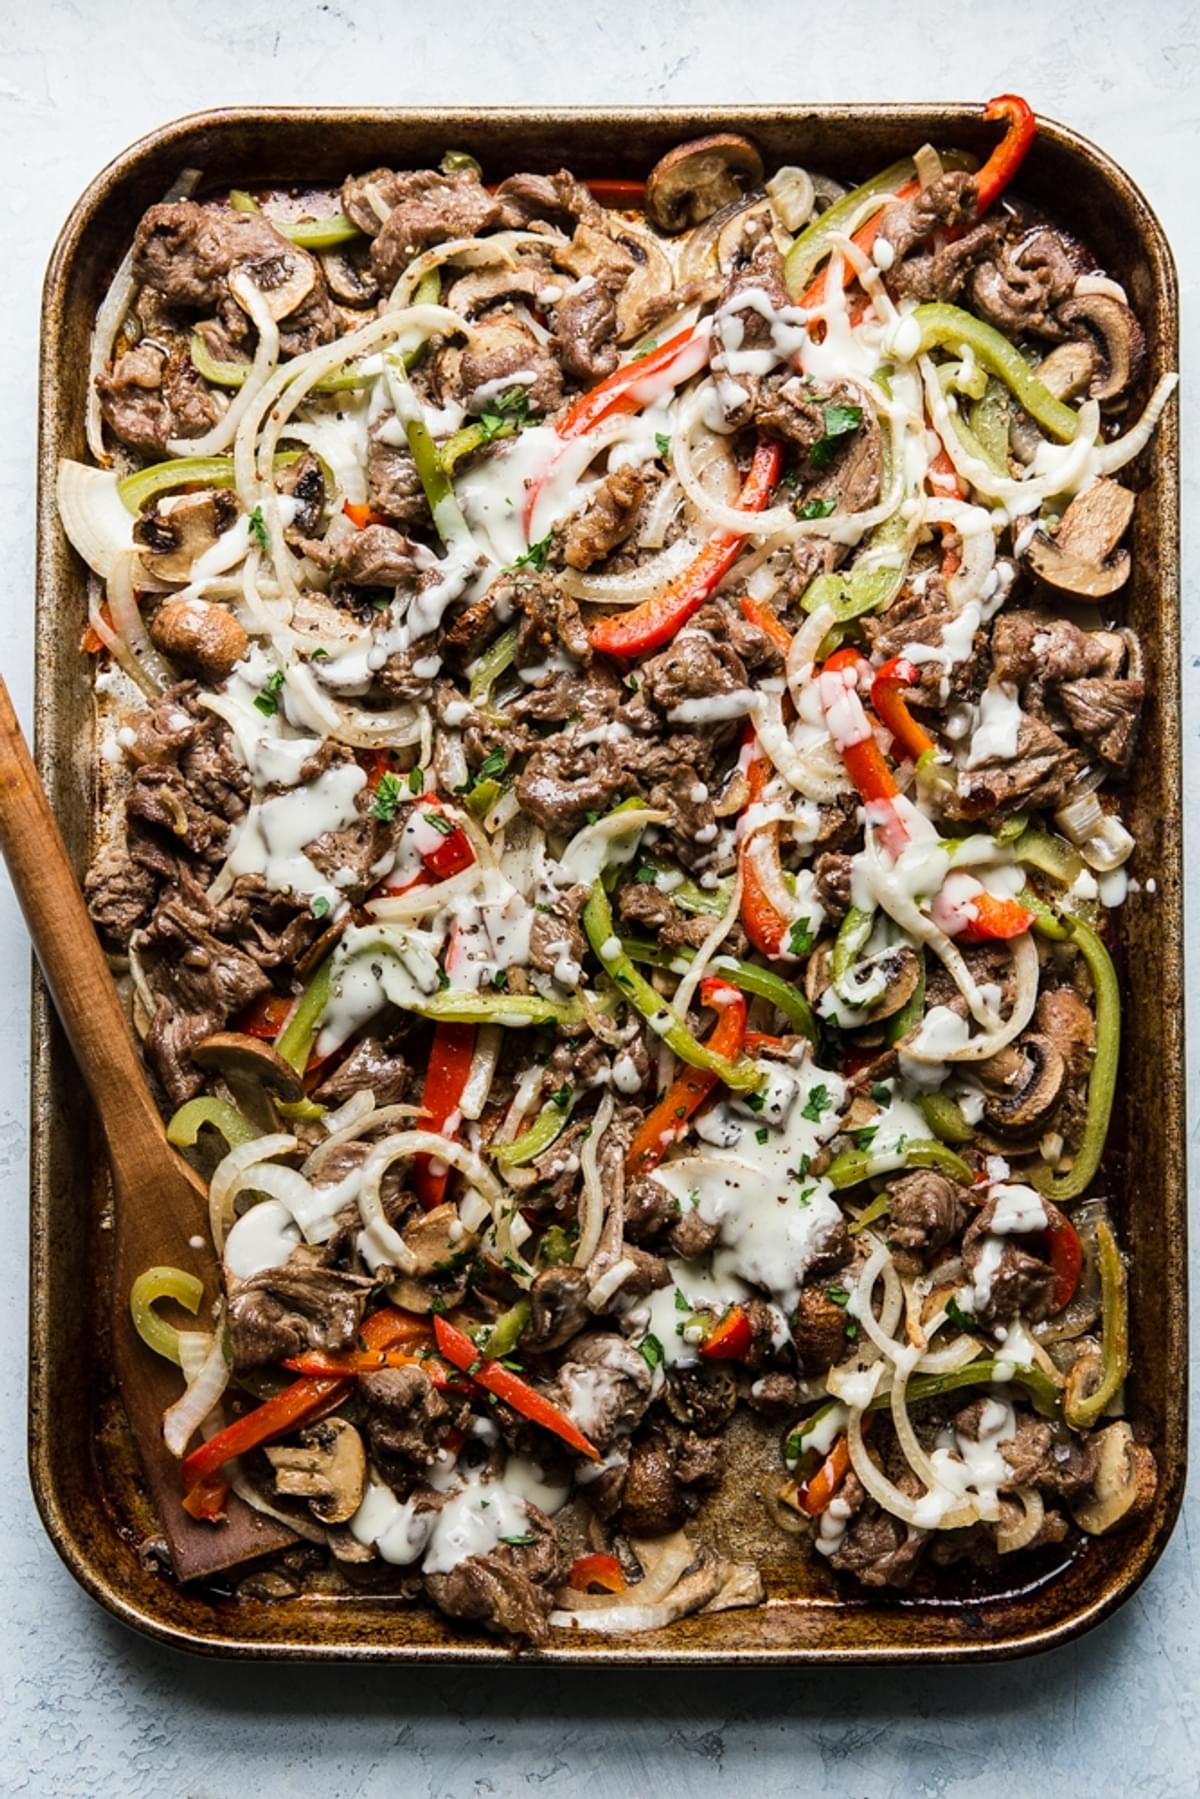 thinly sliced steak bell peppers and onions cooked on a sheet pan for Philly Cheese steak with provolone cheese sauce